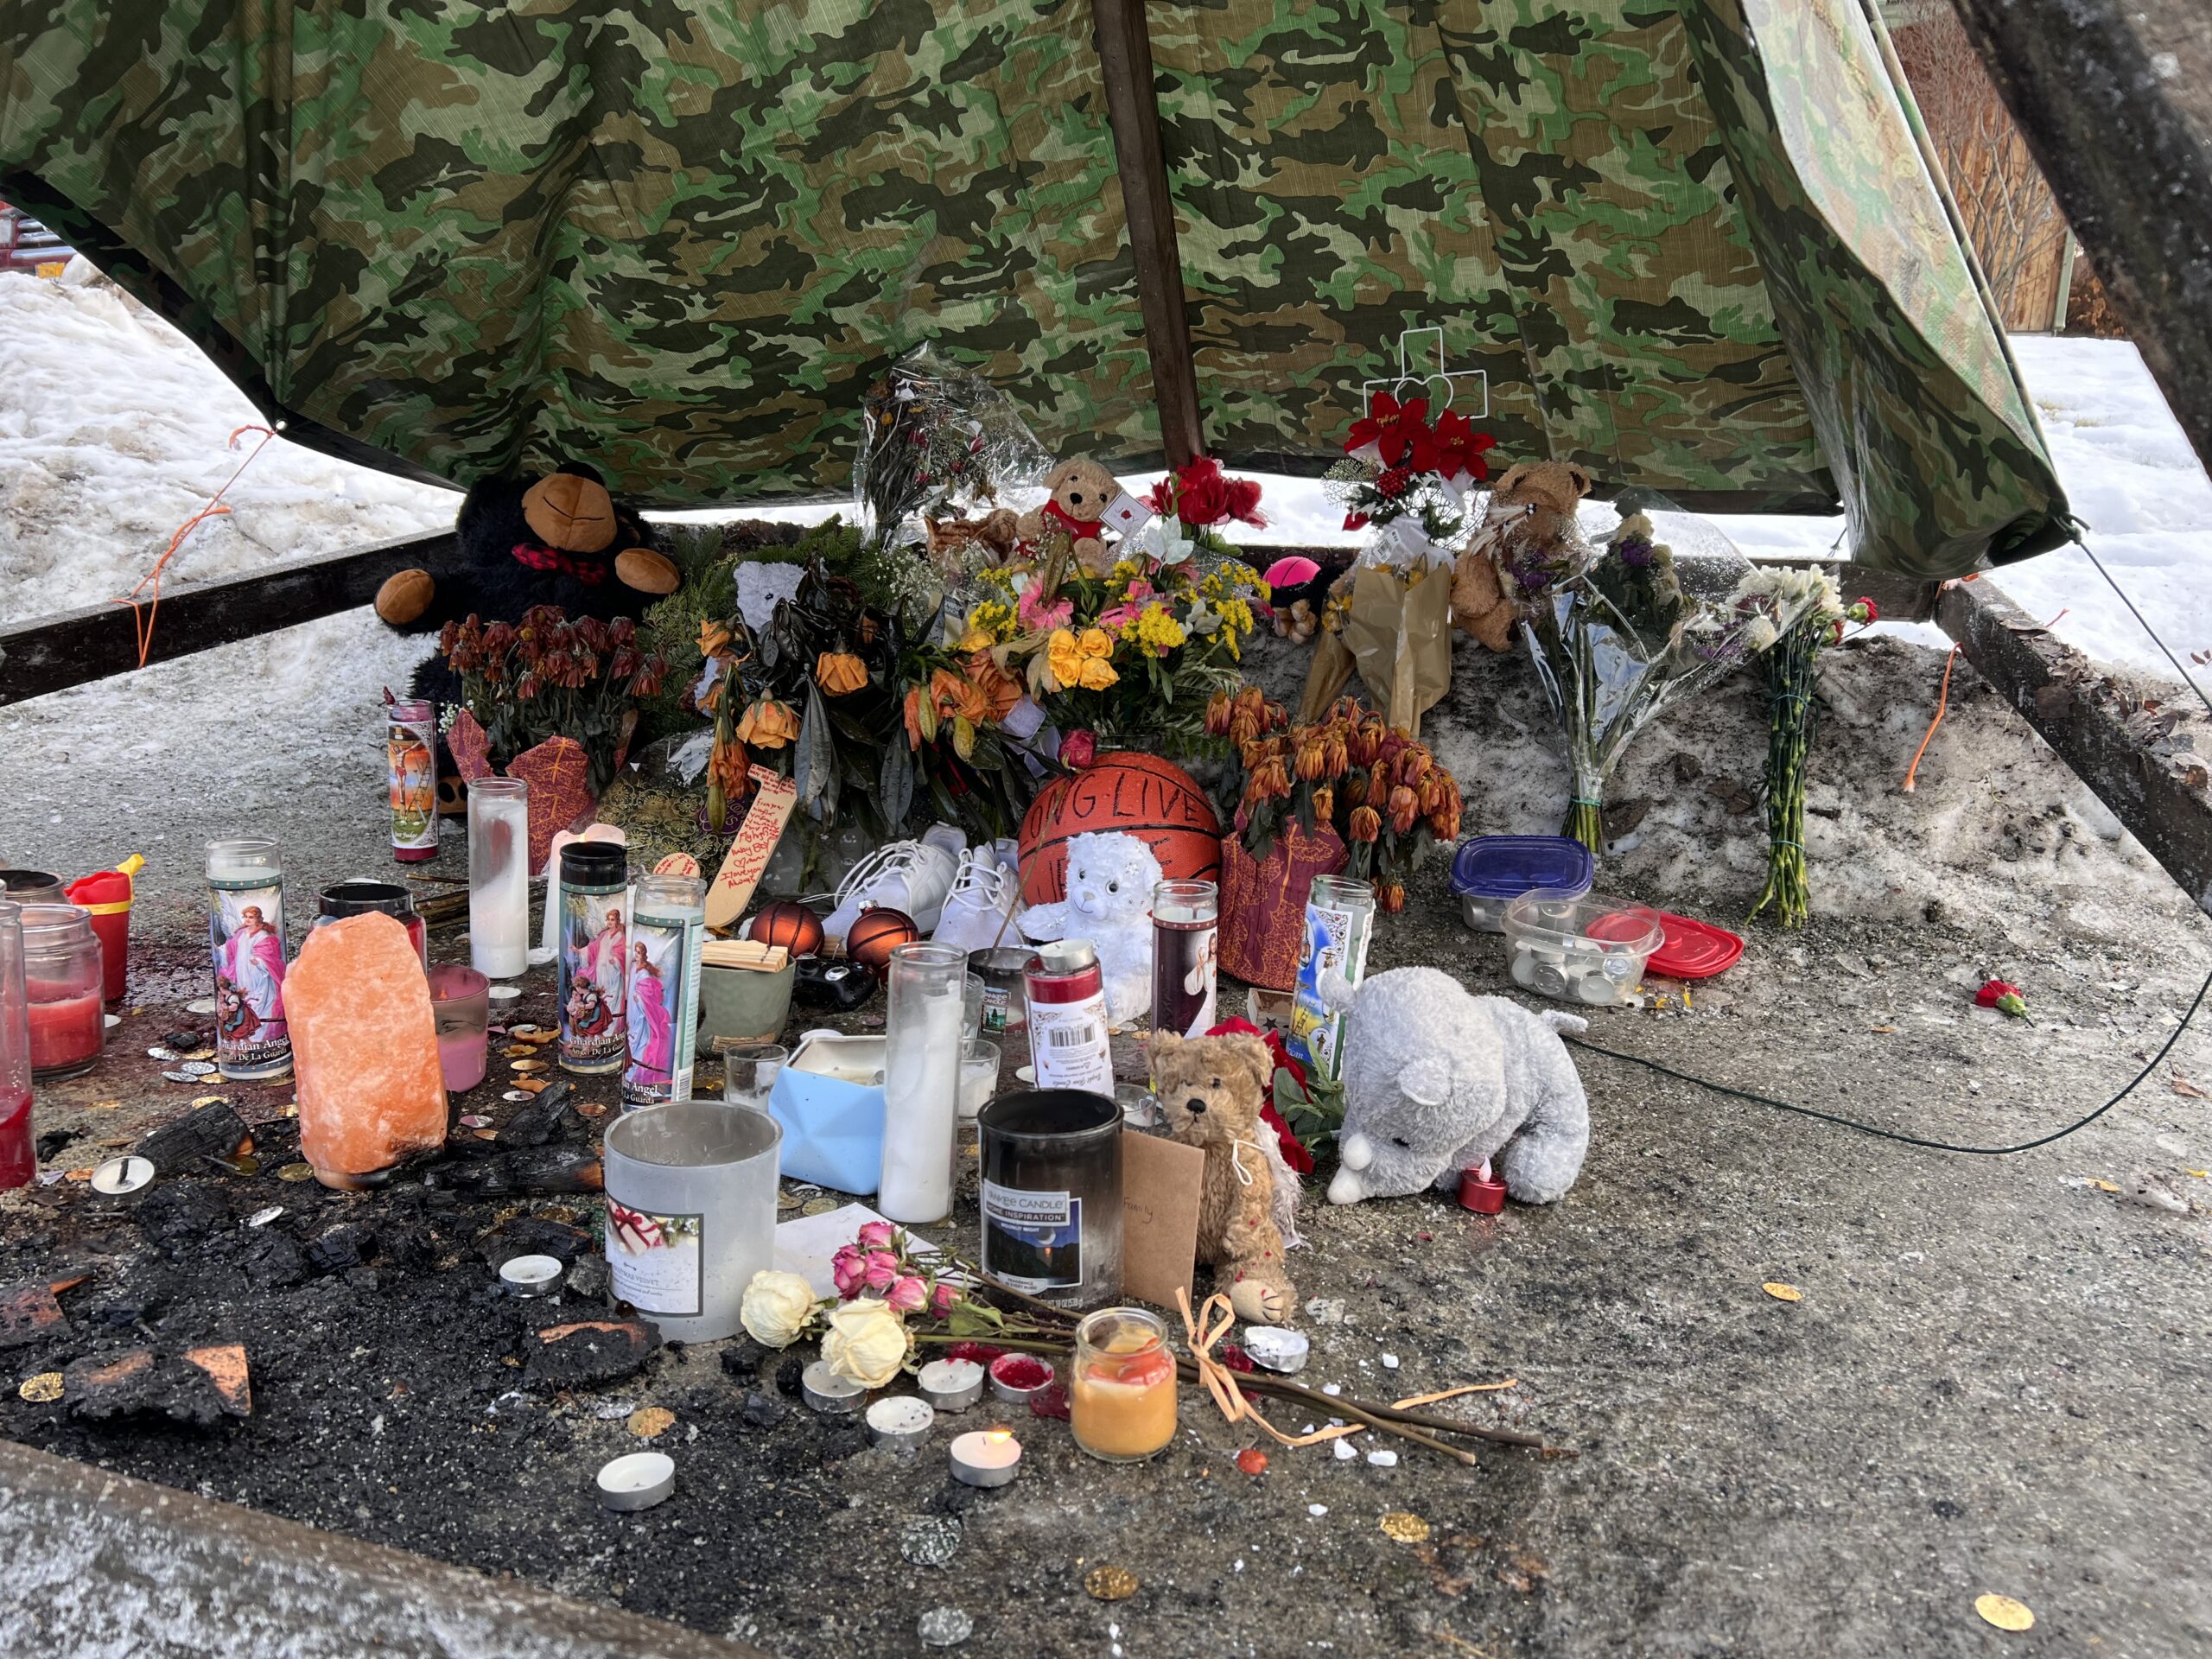 a memorial with stuffed animals and flowers under a tarp, on an icy road